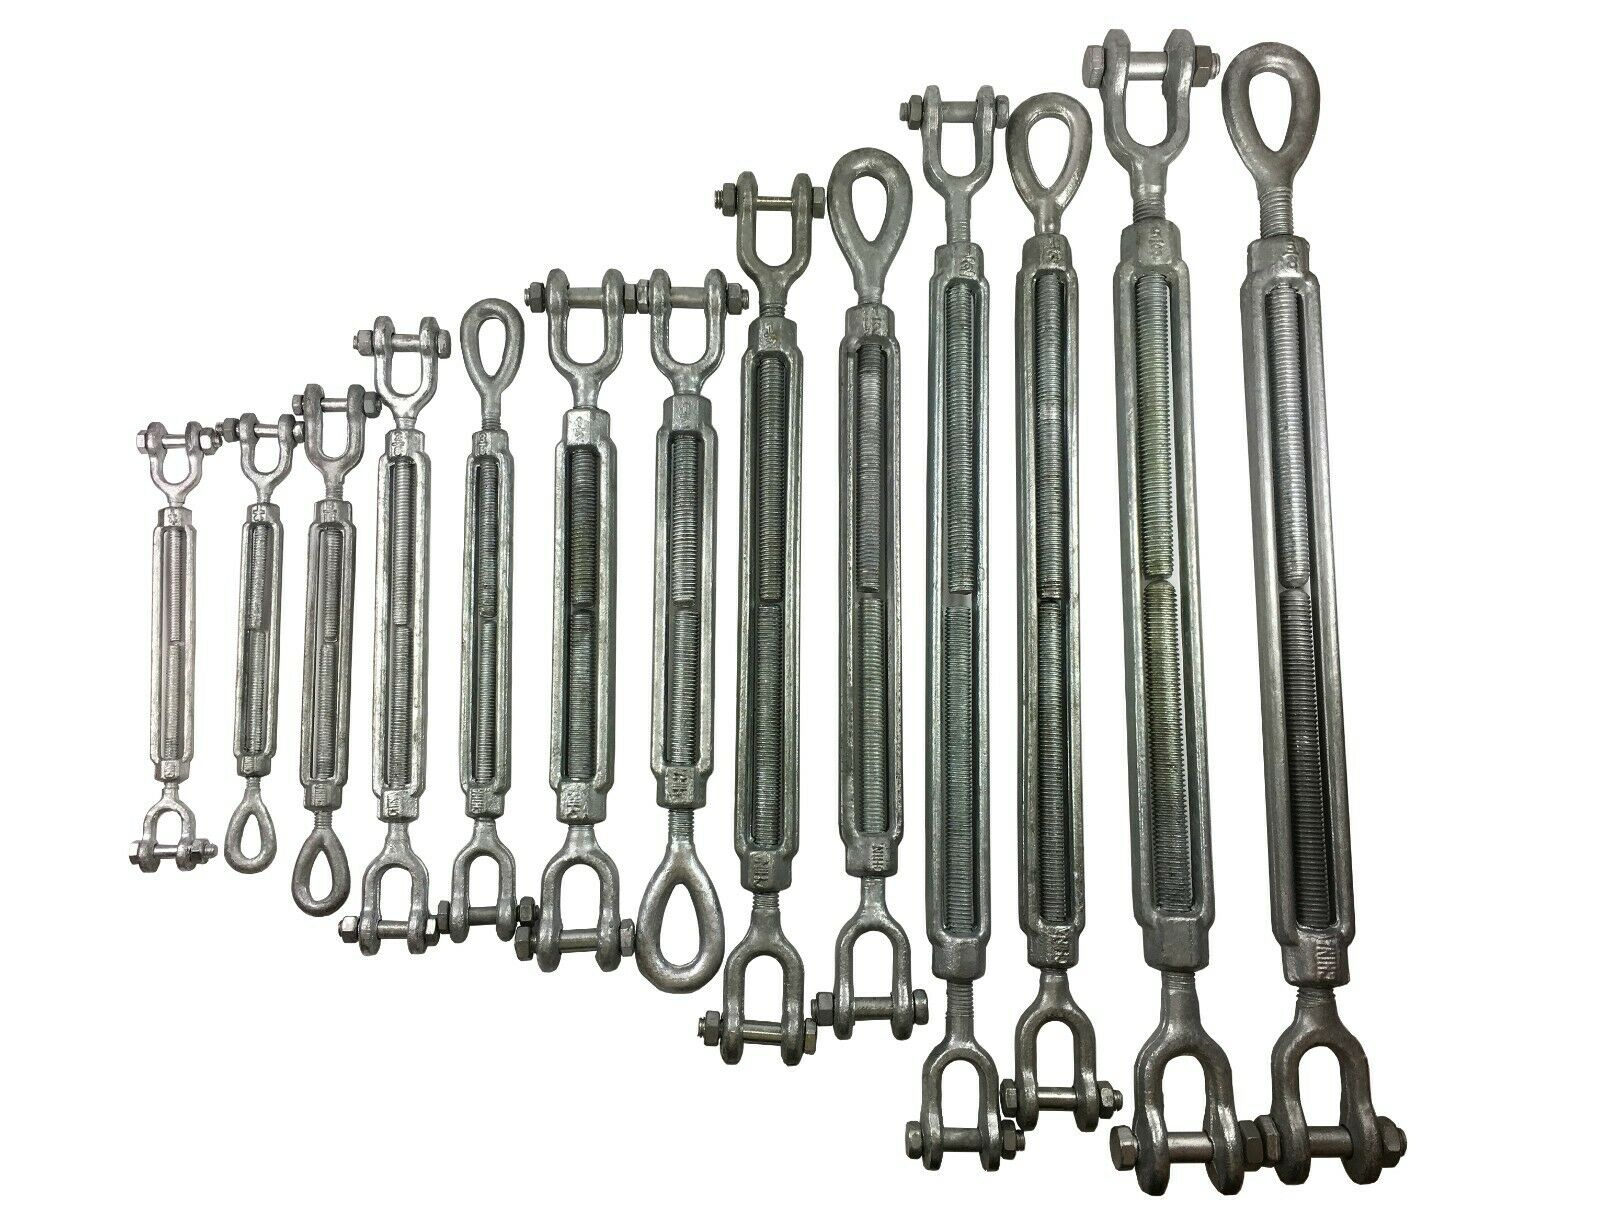 Turnbuckles Drop Forged / Hot Dipped Galvanized Steel Turnbuckle Eye Jaw Hook